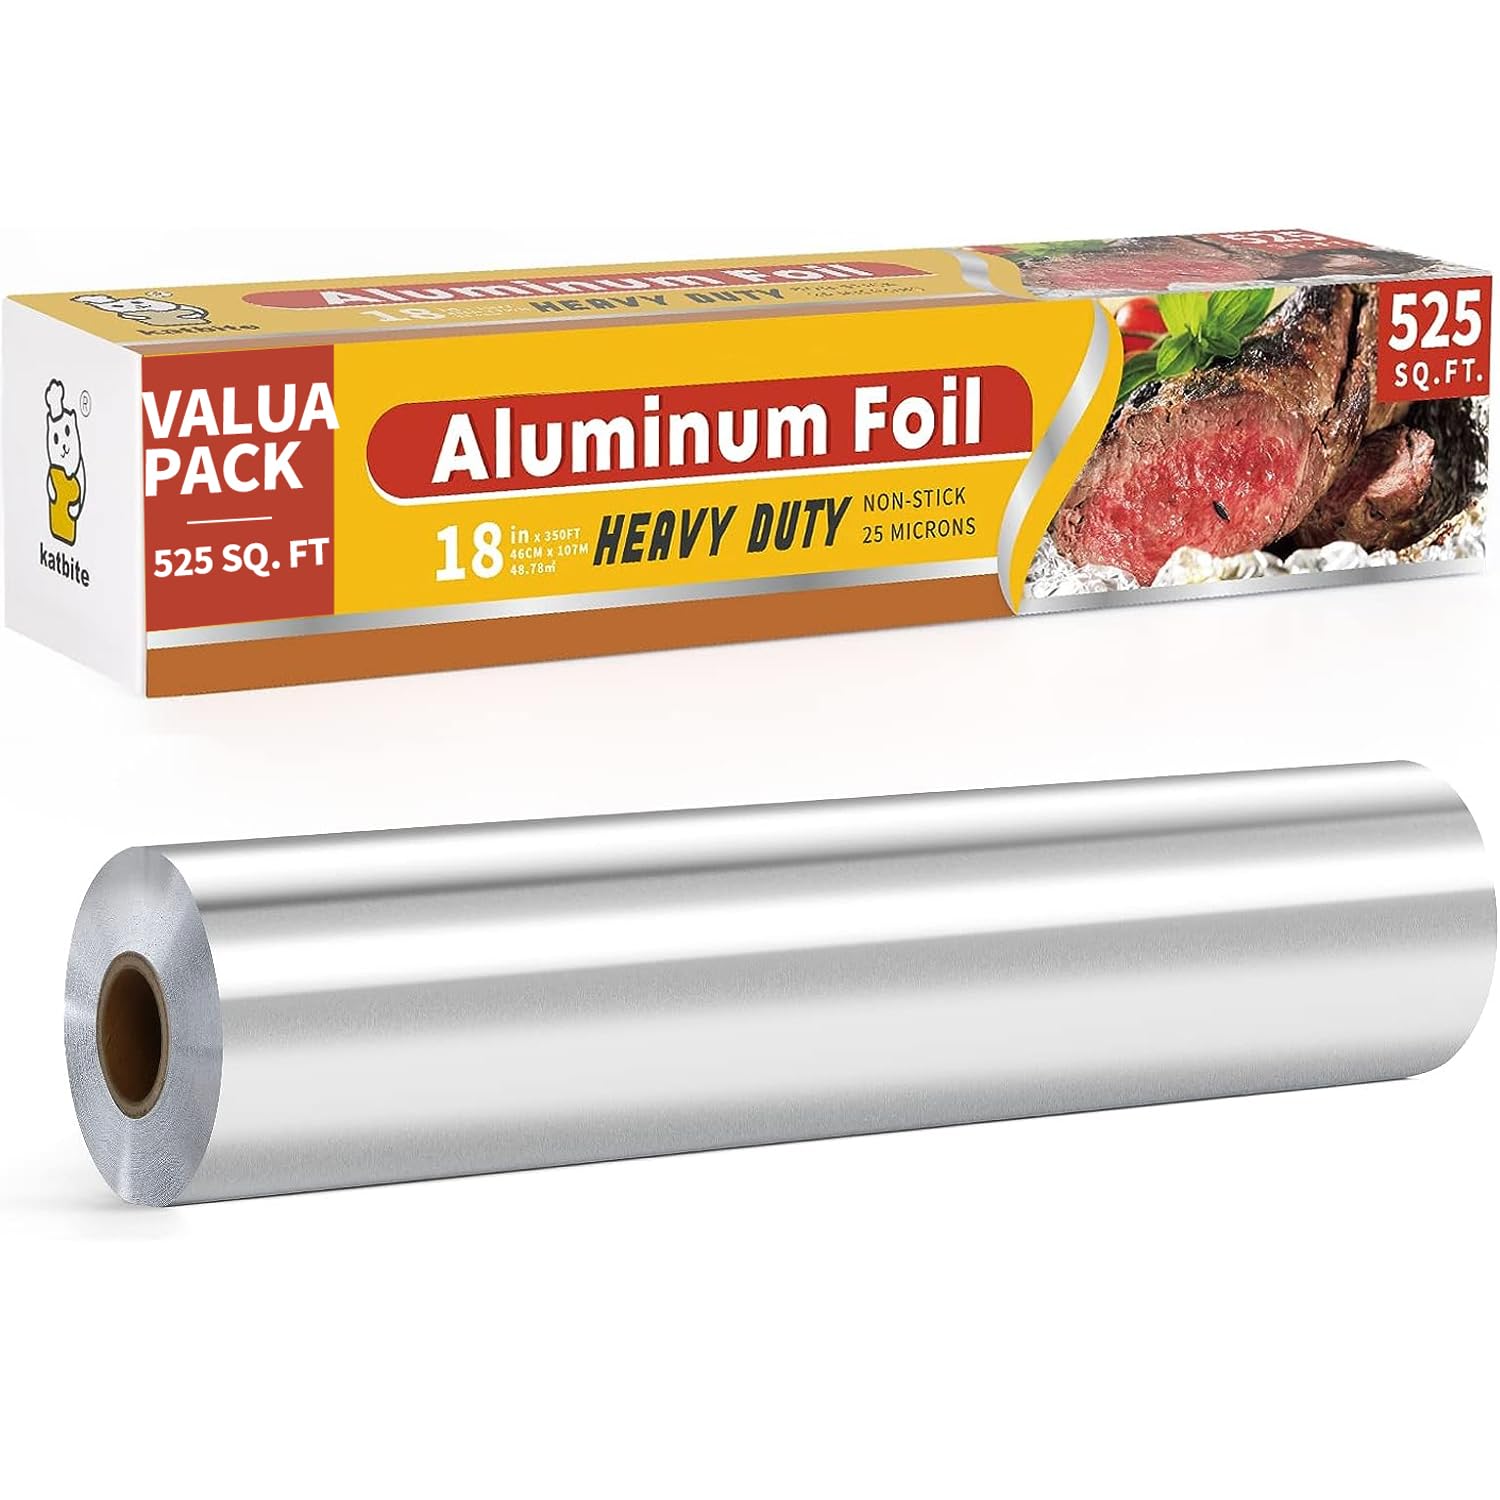  Katbite Aluminum Foil Heavy Duty 18 Inch Wide, 25 Micron Thick Strong  Heavy Duty Foil Aluminum Roll Wrap for Commercial Catering, Grilling,  Roasting, Baking, Home Cooking, 18x525s.f : Arts, Crafts 